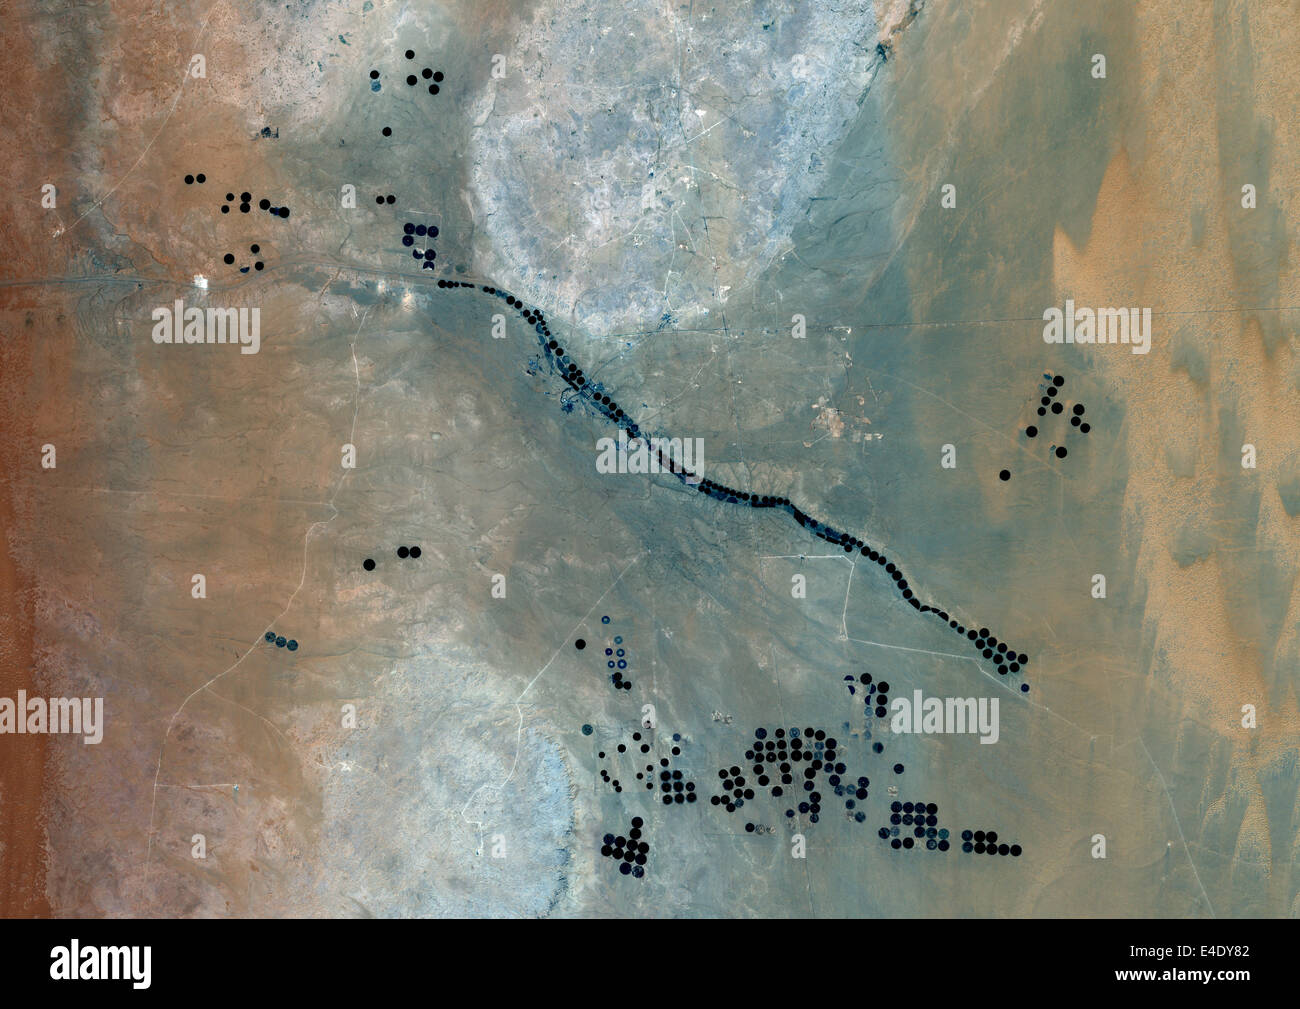 Agriculture In The Desert In 2001, Saudi Arabia, True Colour Satellite Image. True colour satellite image of agriculture in the Stock Photo